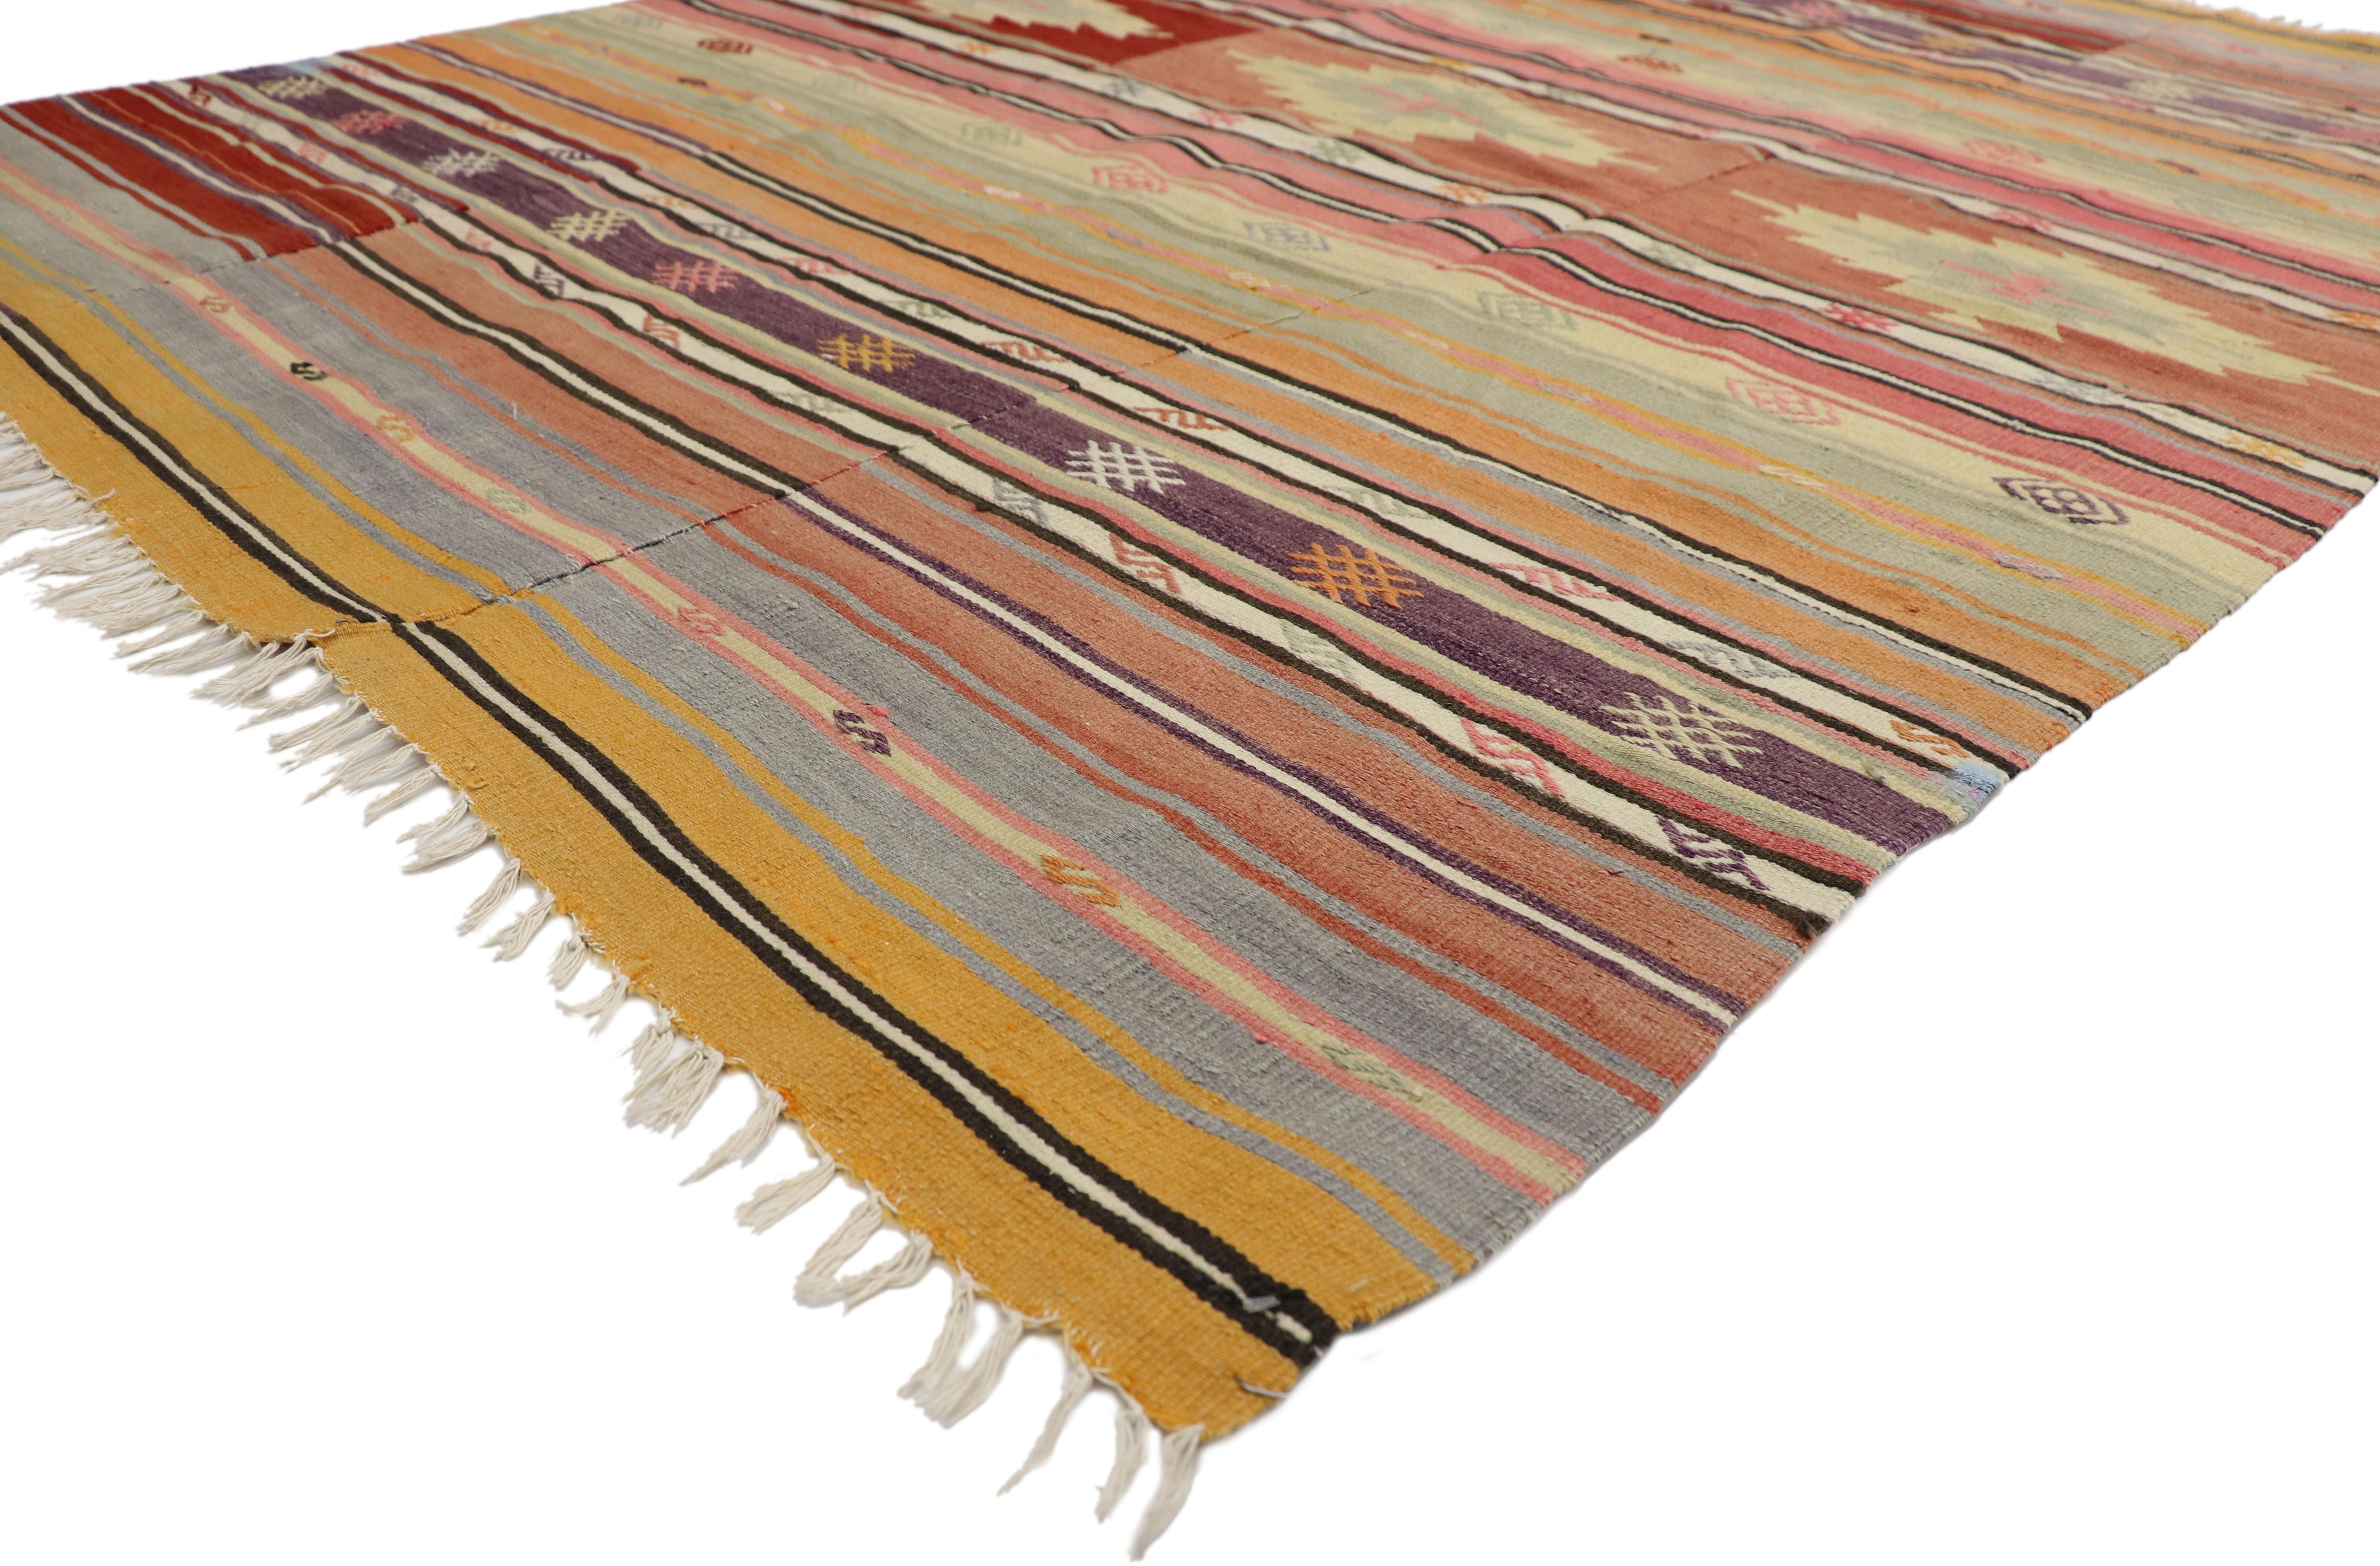 51272, Southwest meets boho chic in this vintage Turkish Kilim rug flat-weave Kilim. This vintage Turkish Kilim rug displays symbolic motifs and bright hues make a statement and create a sense of animation. This Bohemian southwest style Kilim rug is